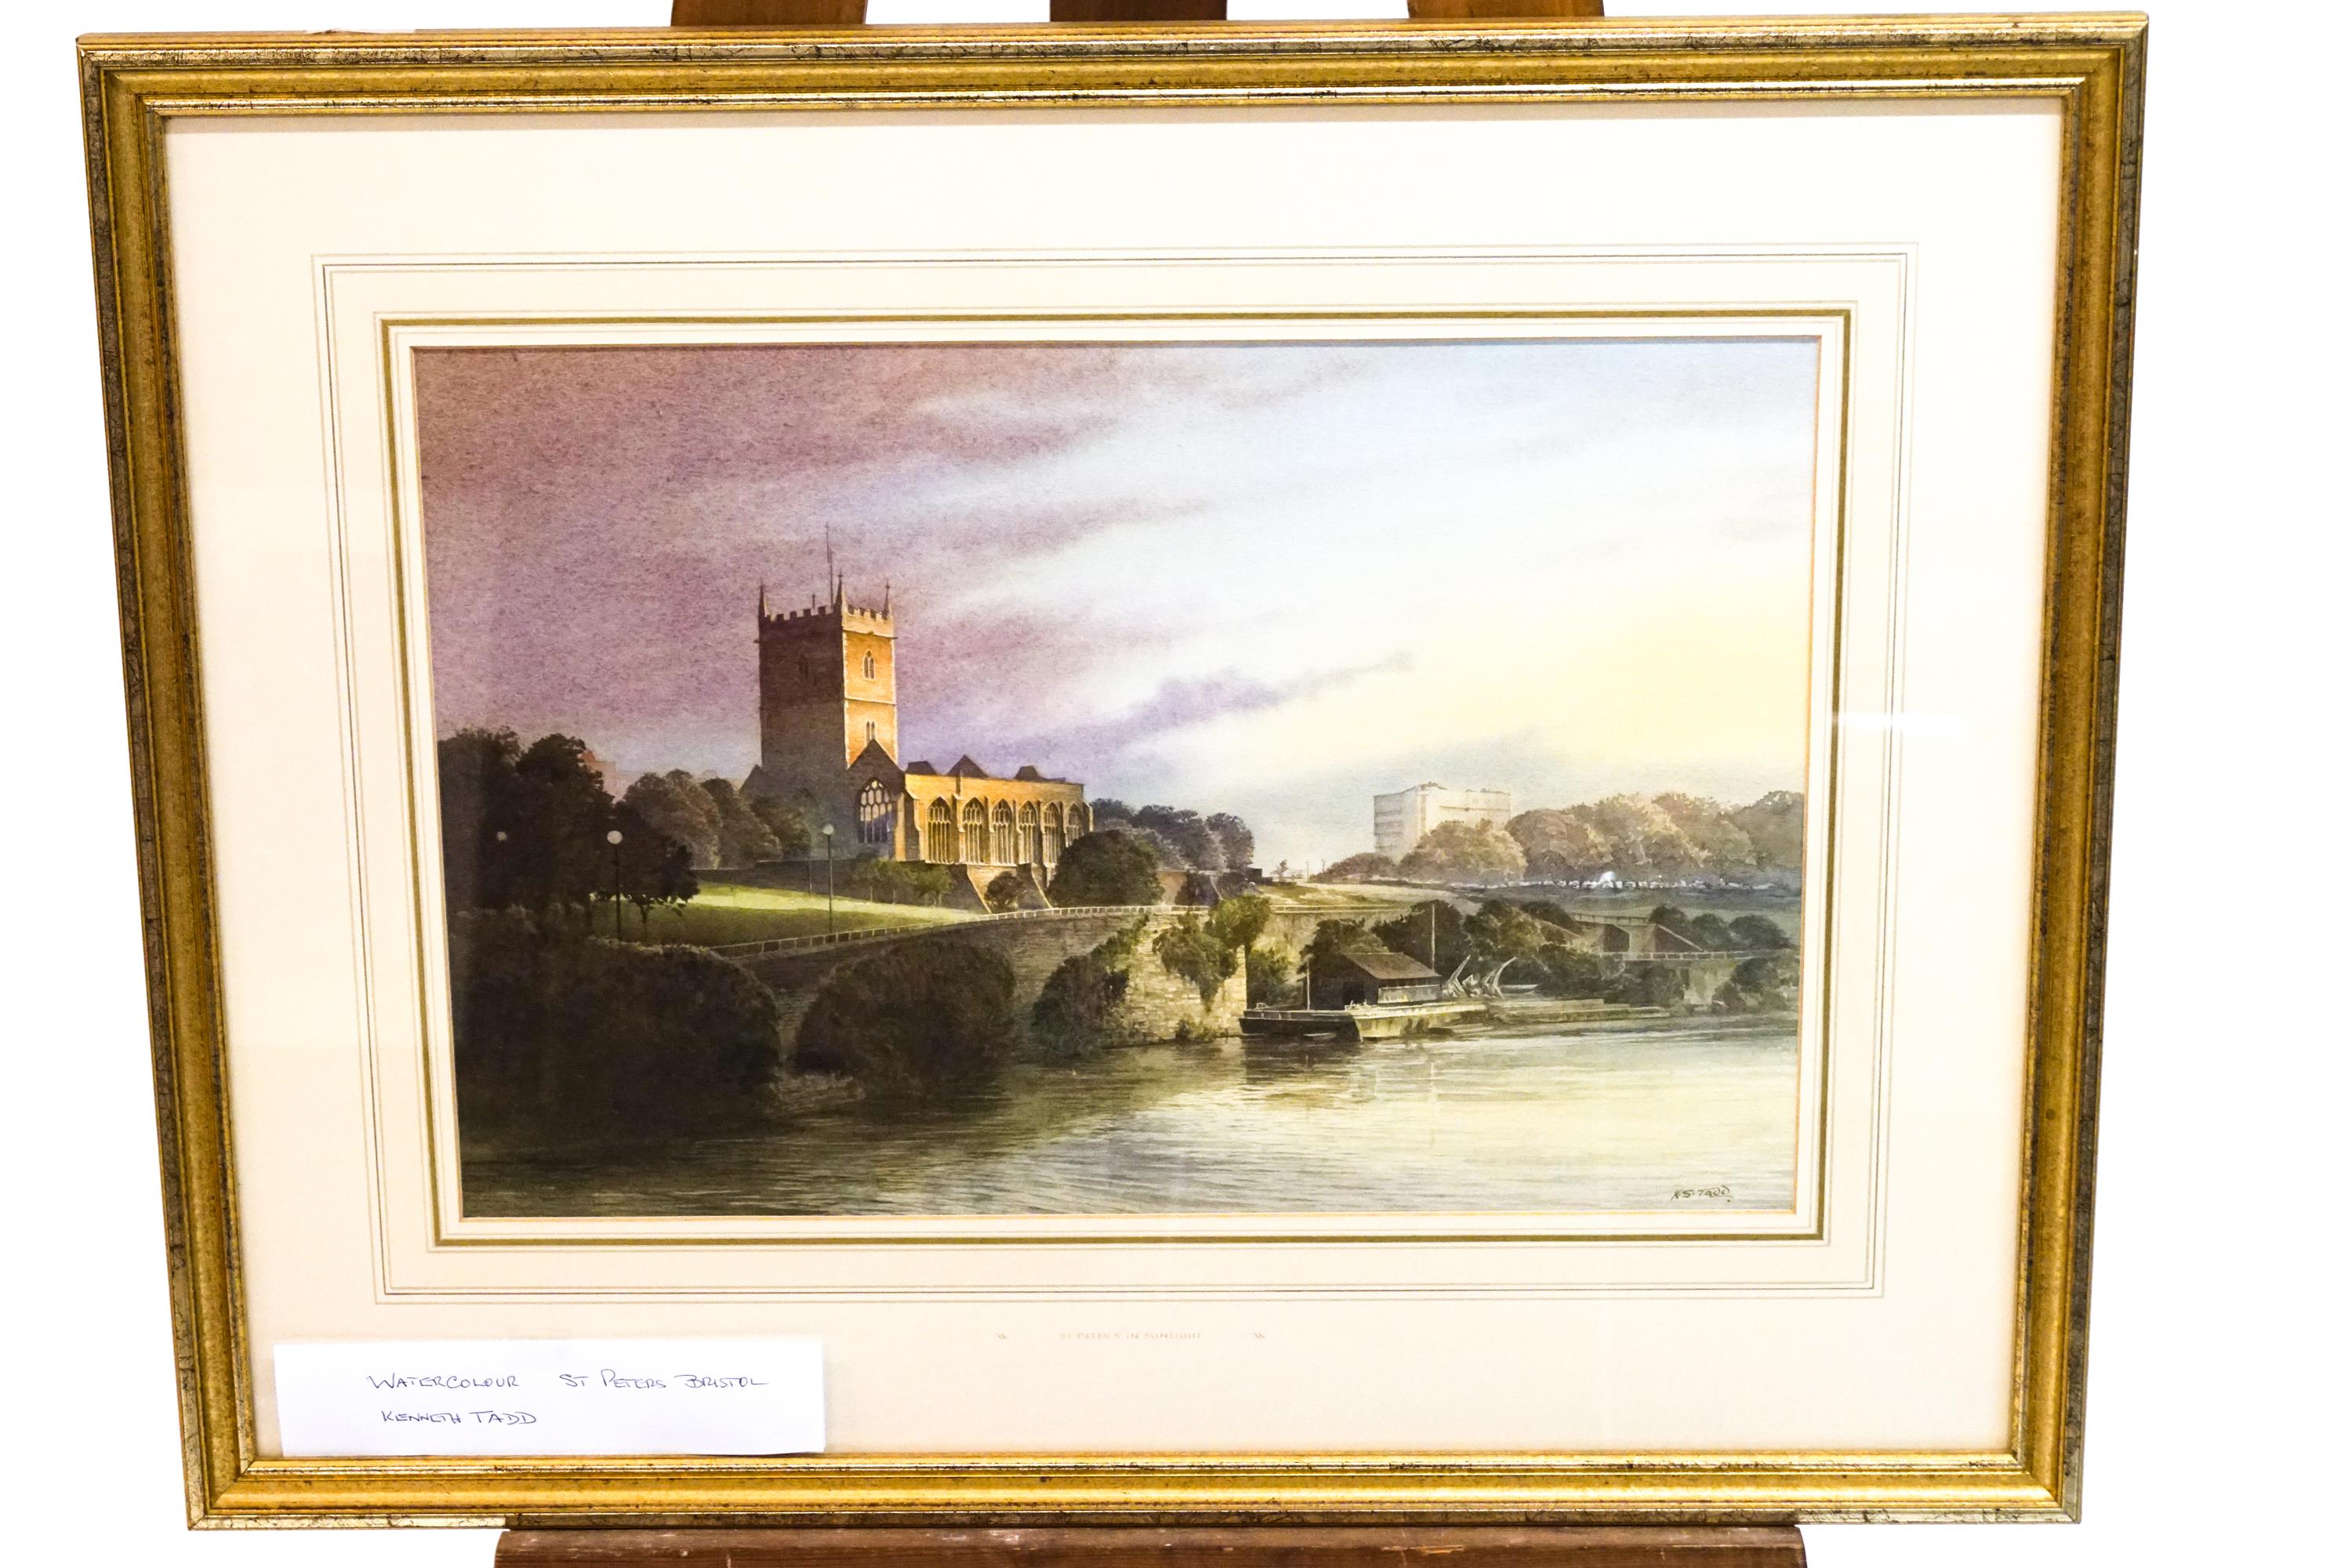 Kenneth Tadd, 'St Peter's In Southlight' , Castle Green Bristol, watercolour, signed lower right.